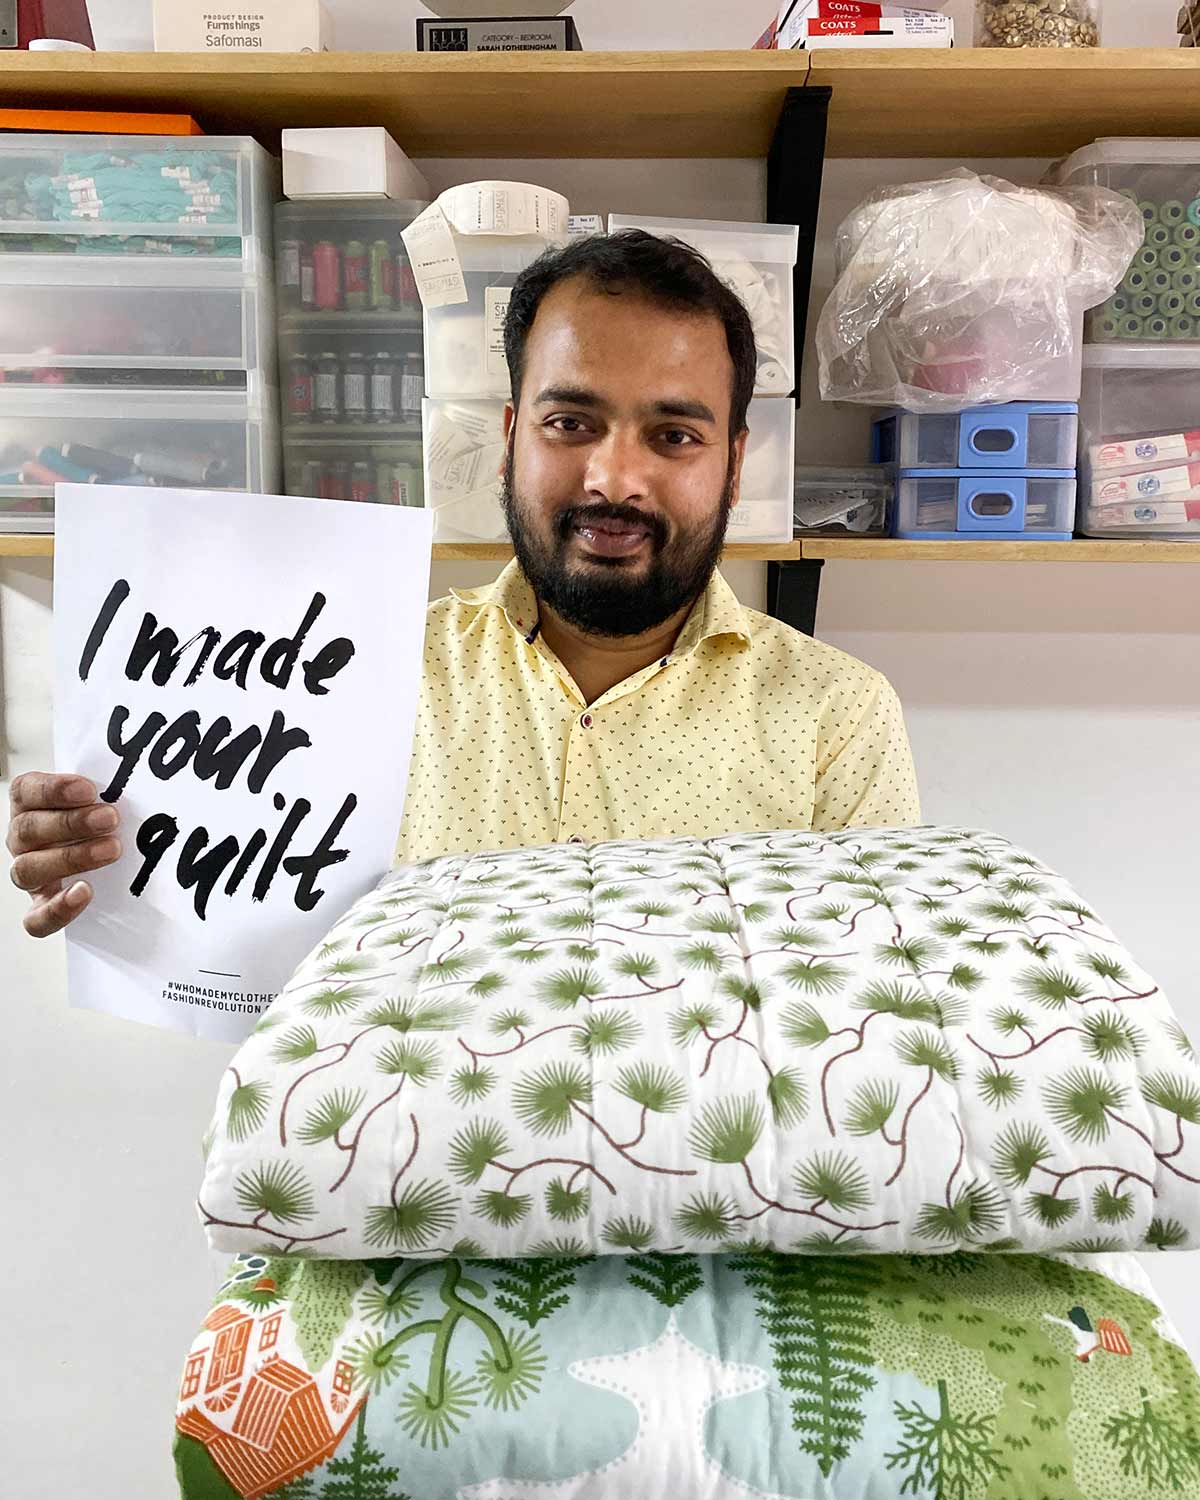 Meet the maker who made your quilt Fashion Revolution Week 2022